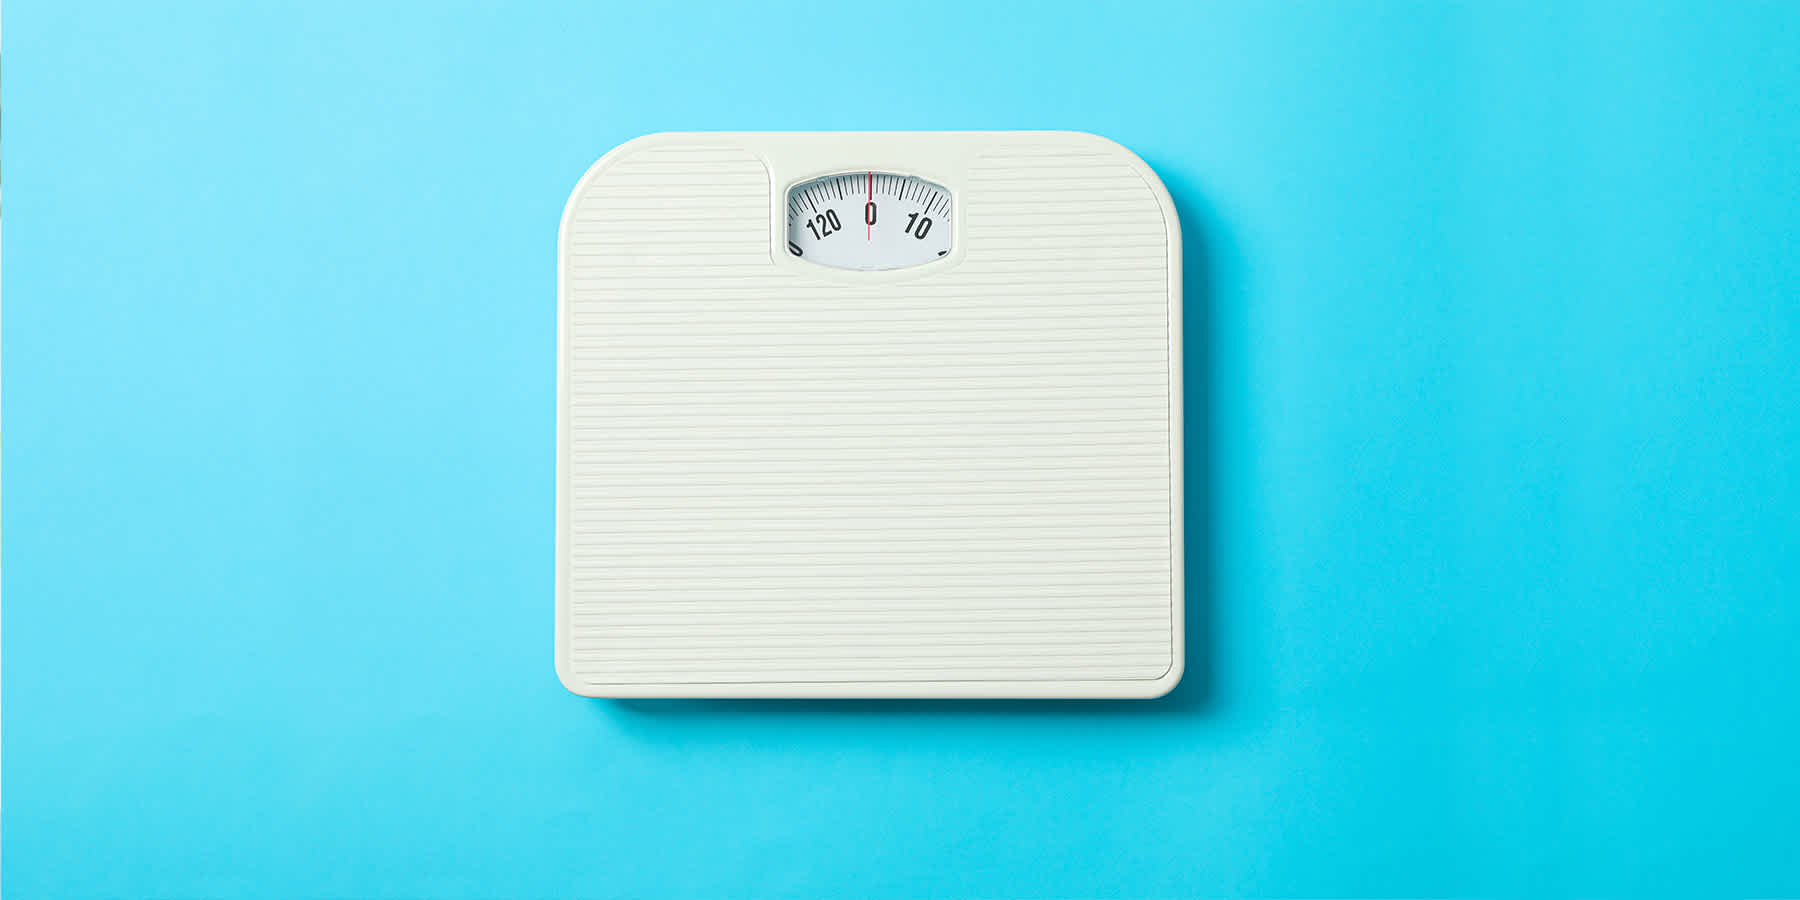 Bathroom scale for measuring your health against a light blue background